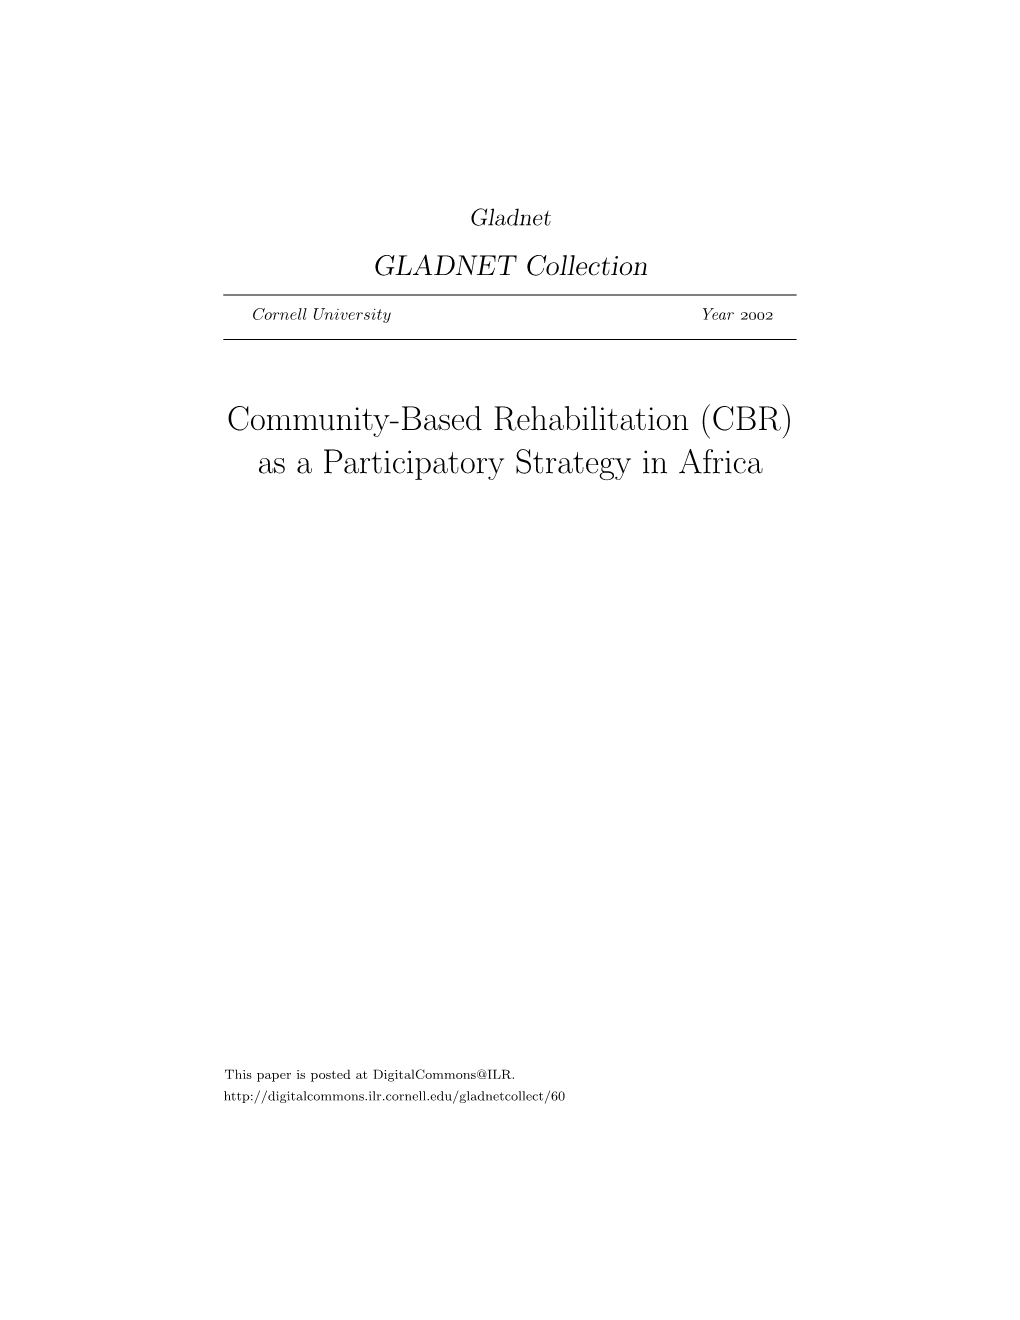 Community-Based Rehabilitation [CBR] As a Participatory Strategy In